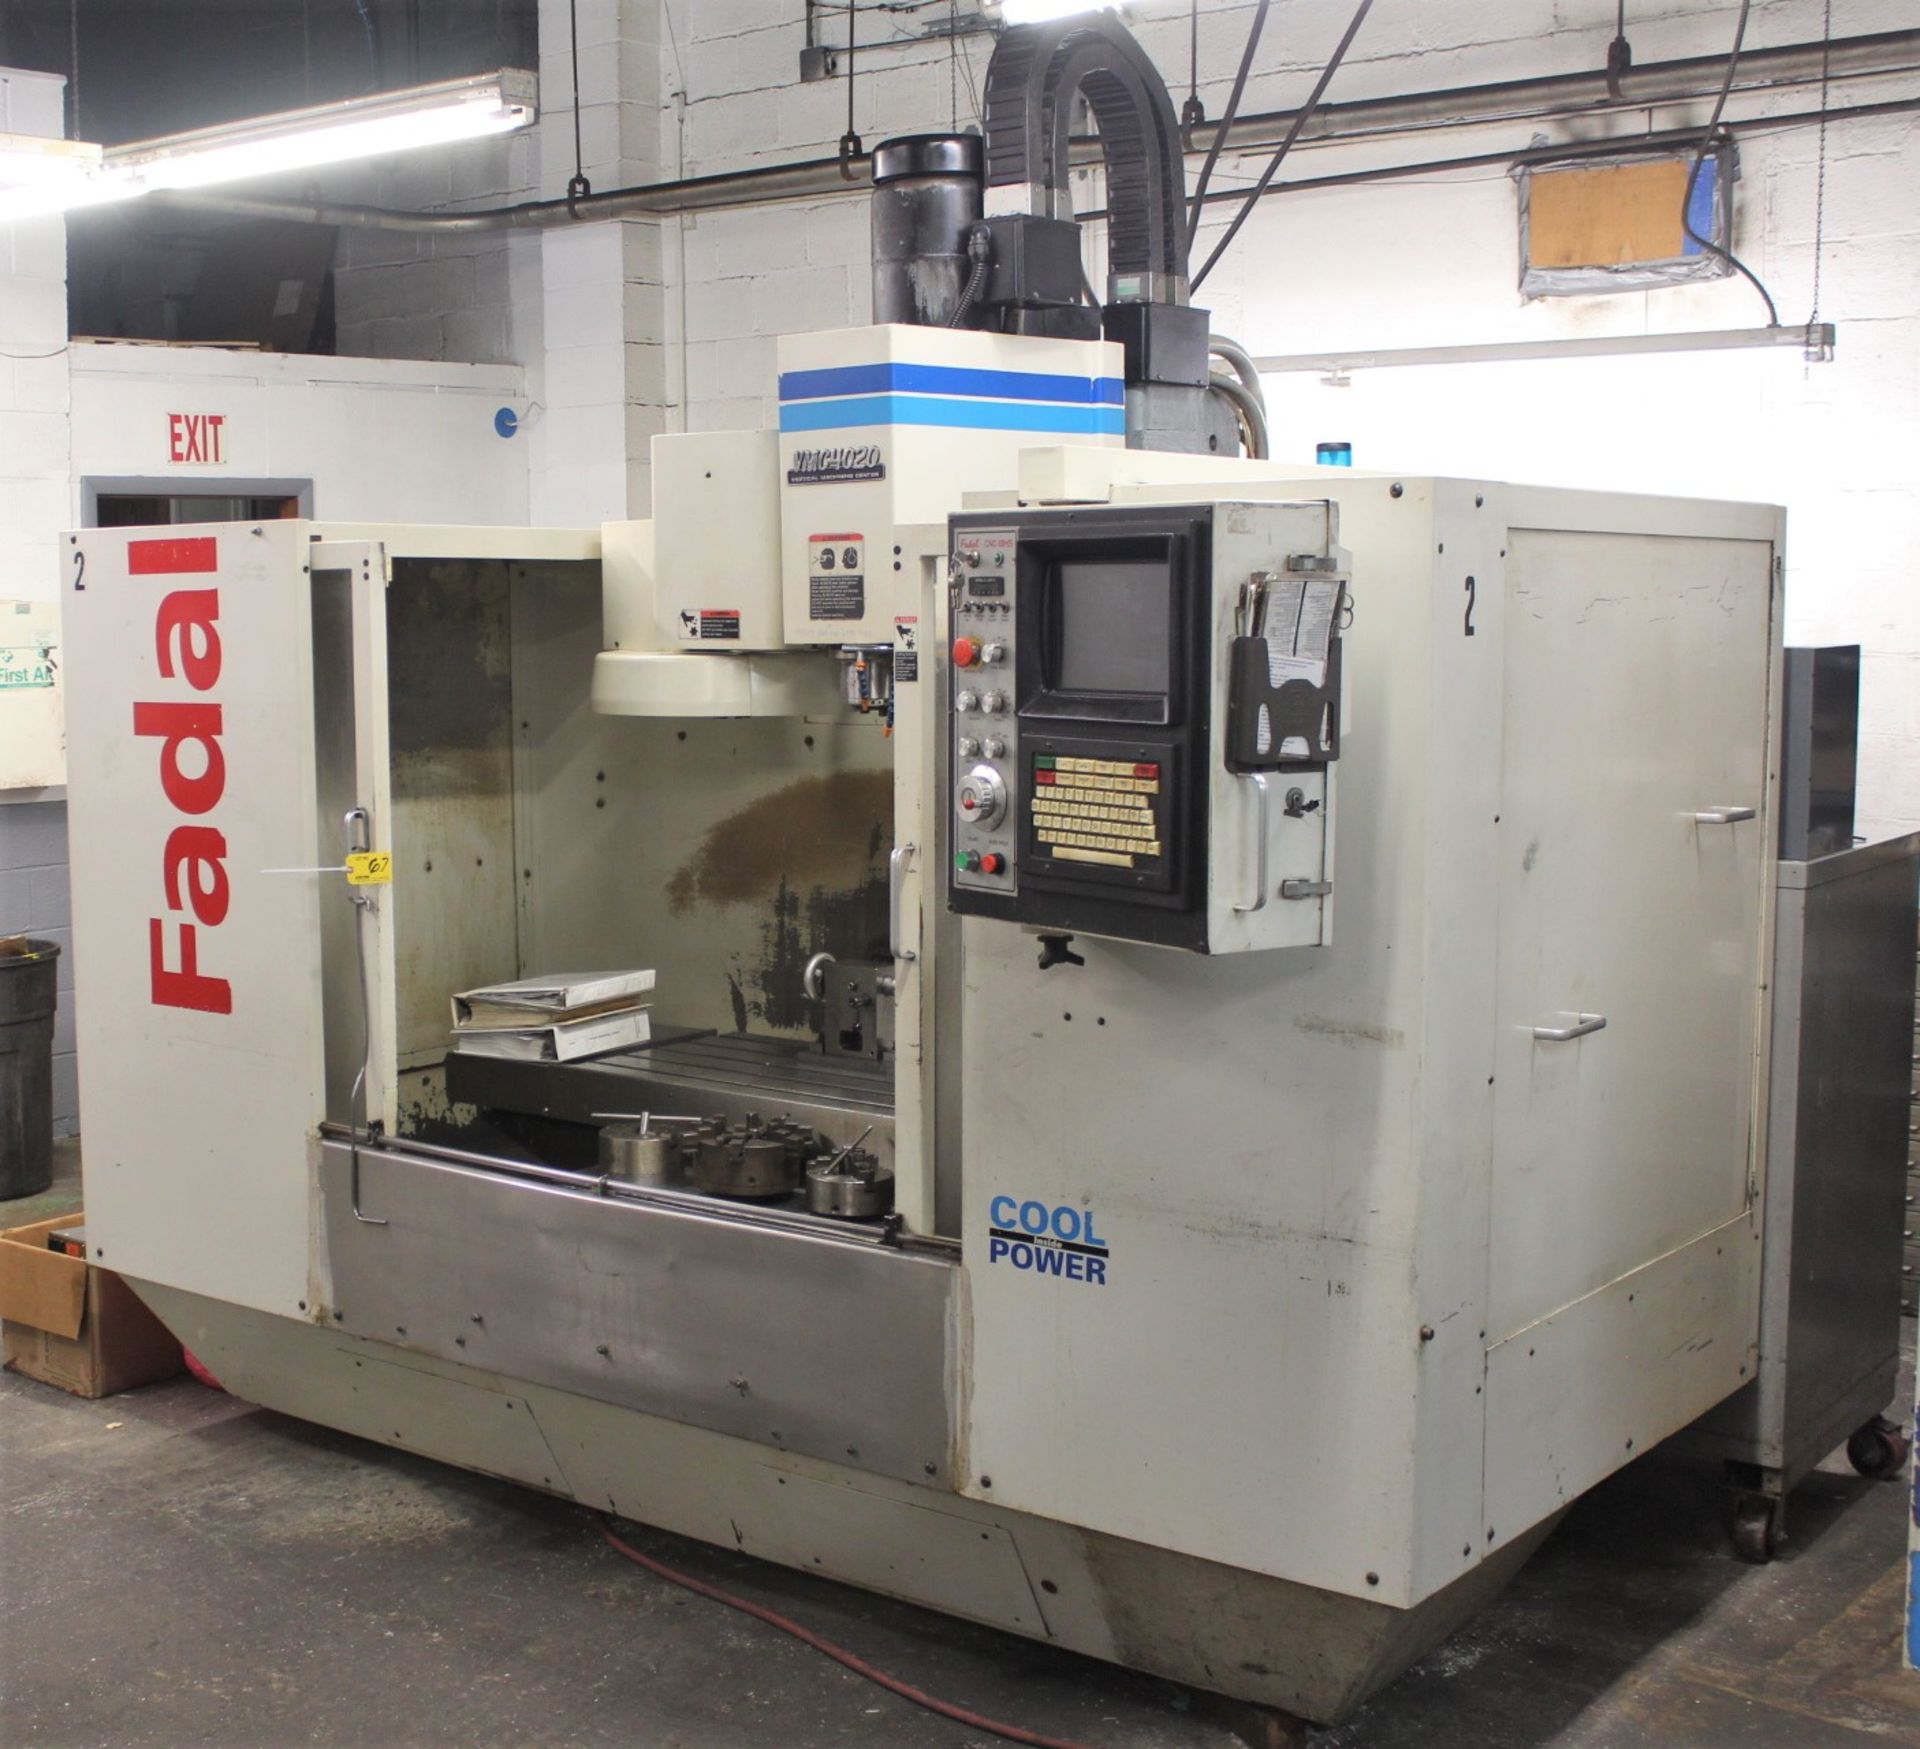 FADAL MDL. VMC-4020 CNC VERTICAL MACHINING CENTER, S/N: 9605568, (1996), TABLE SIZE 40" X 20", - Image 2 of 5